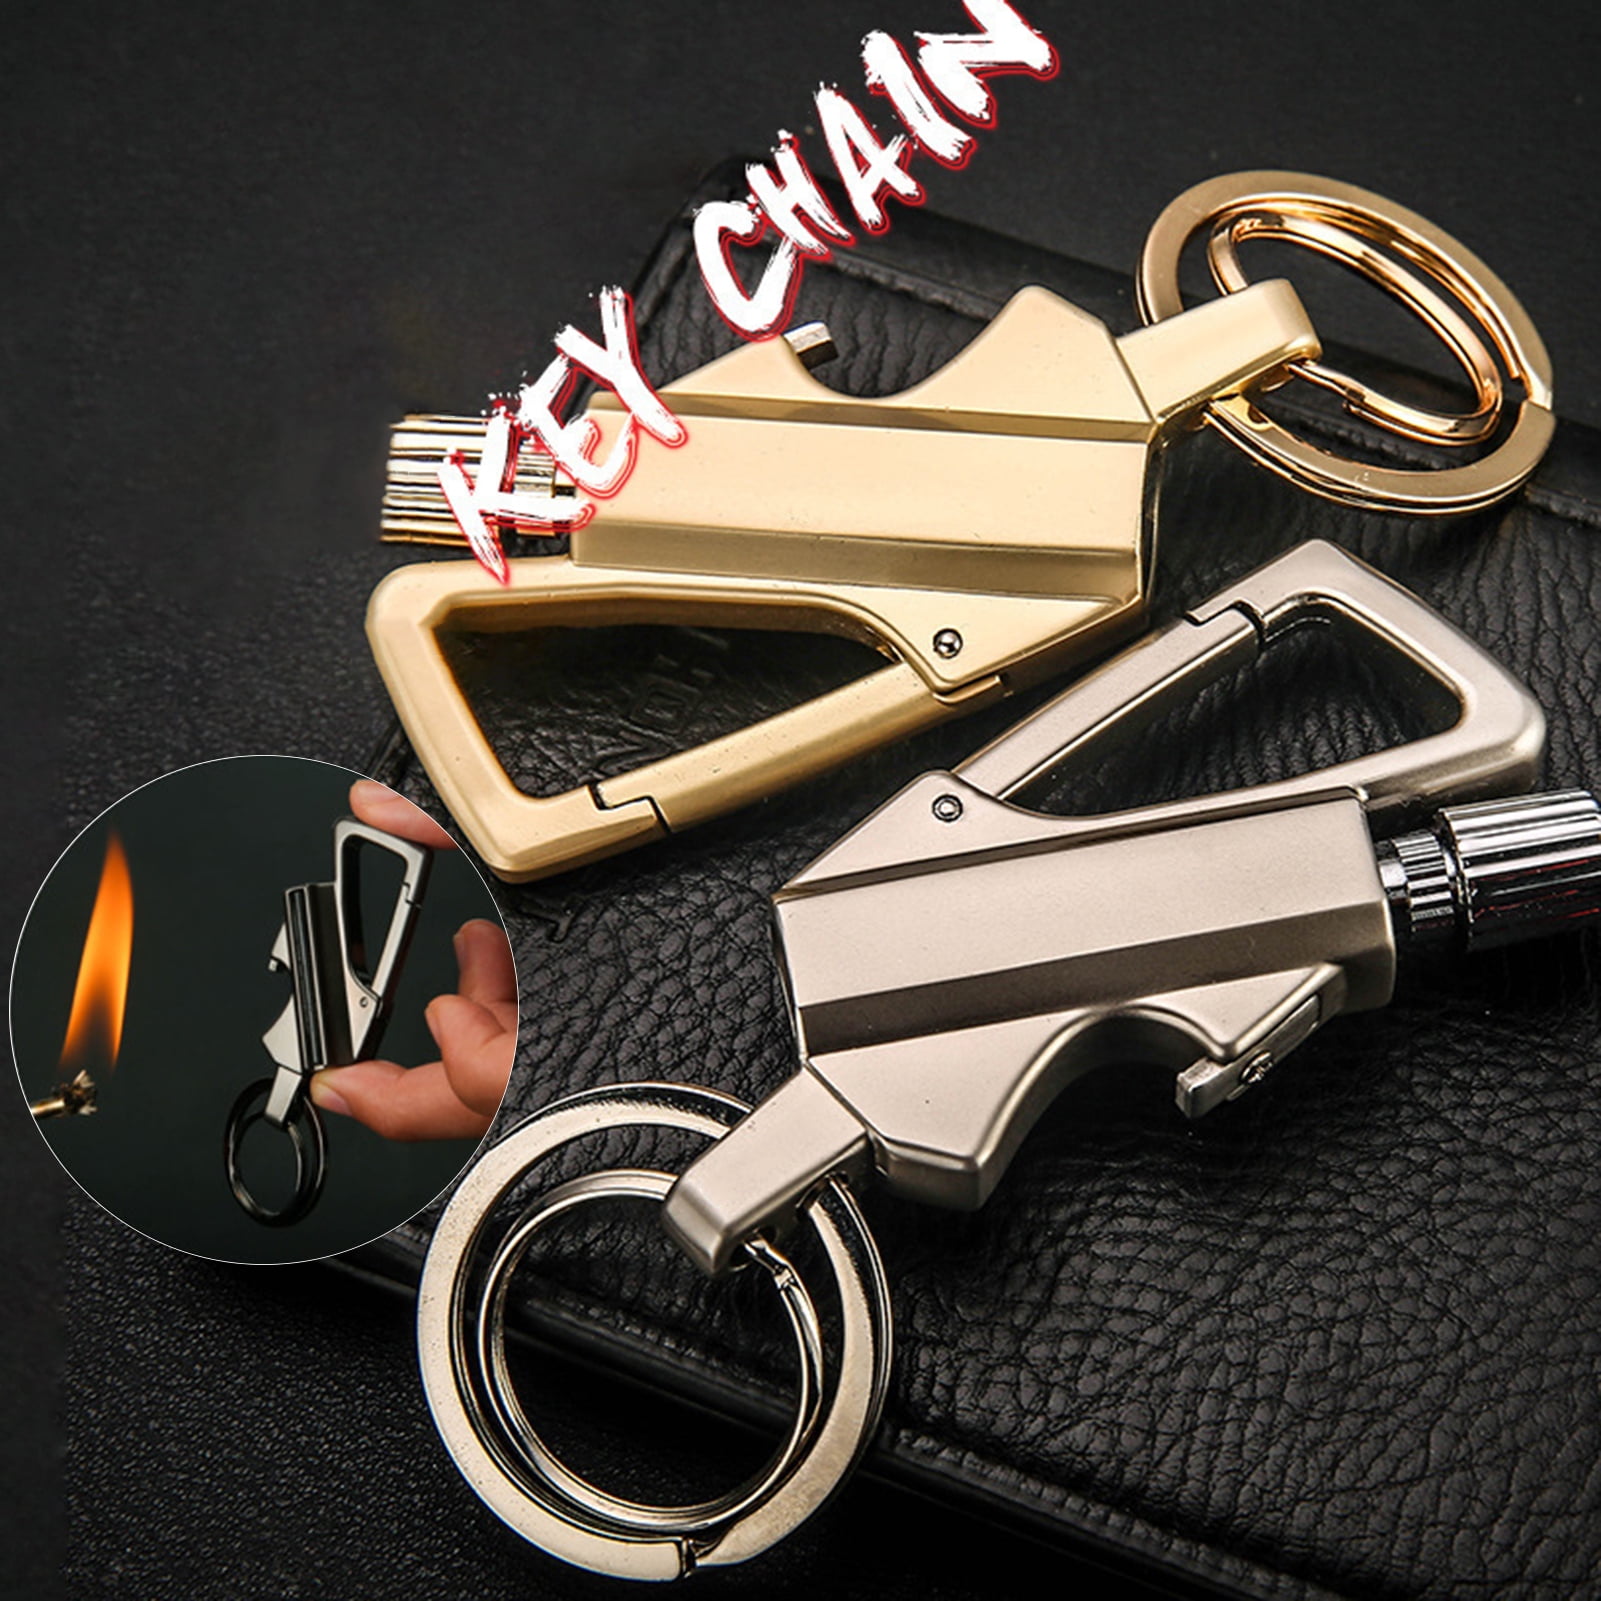 NEW Multifunctional Keychain Lighter USB Clip Camping Hiking Tools BULK